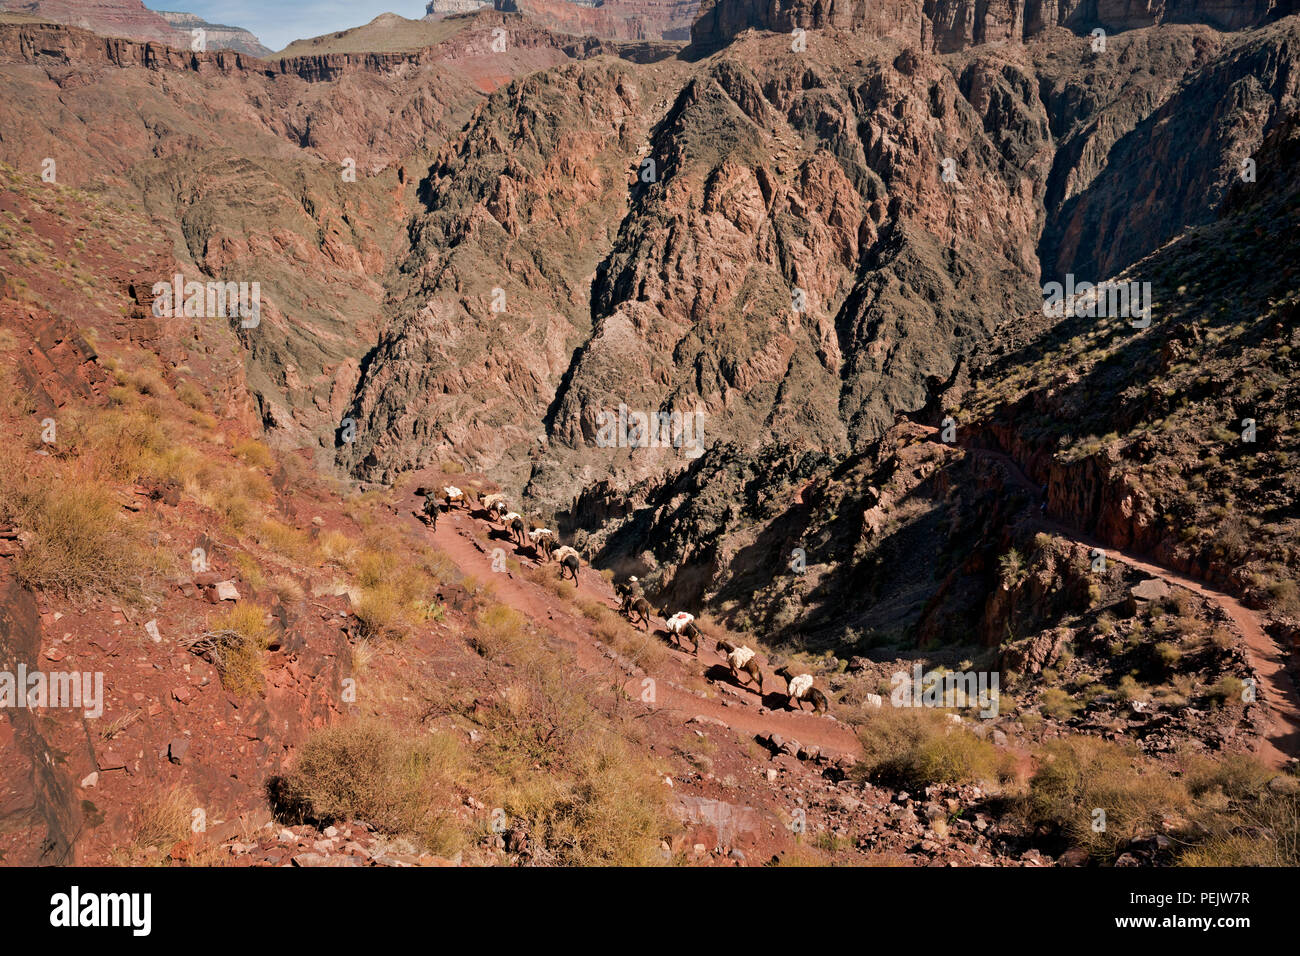 AZ00285-00...ARIZONA - A loaded pack train of mules ascending the South Kaibab Trail below The Tipoff restarea in Grand Canyon National Park. Stock Photo